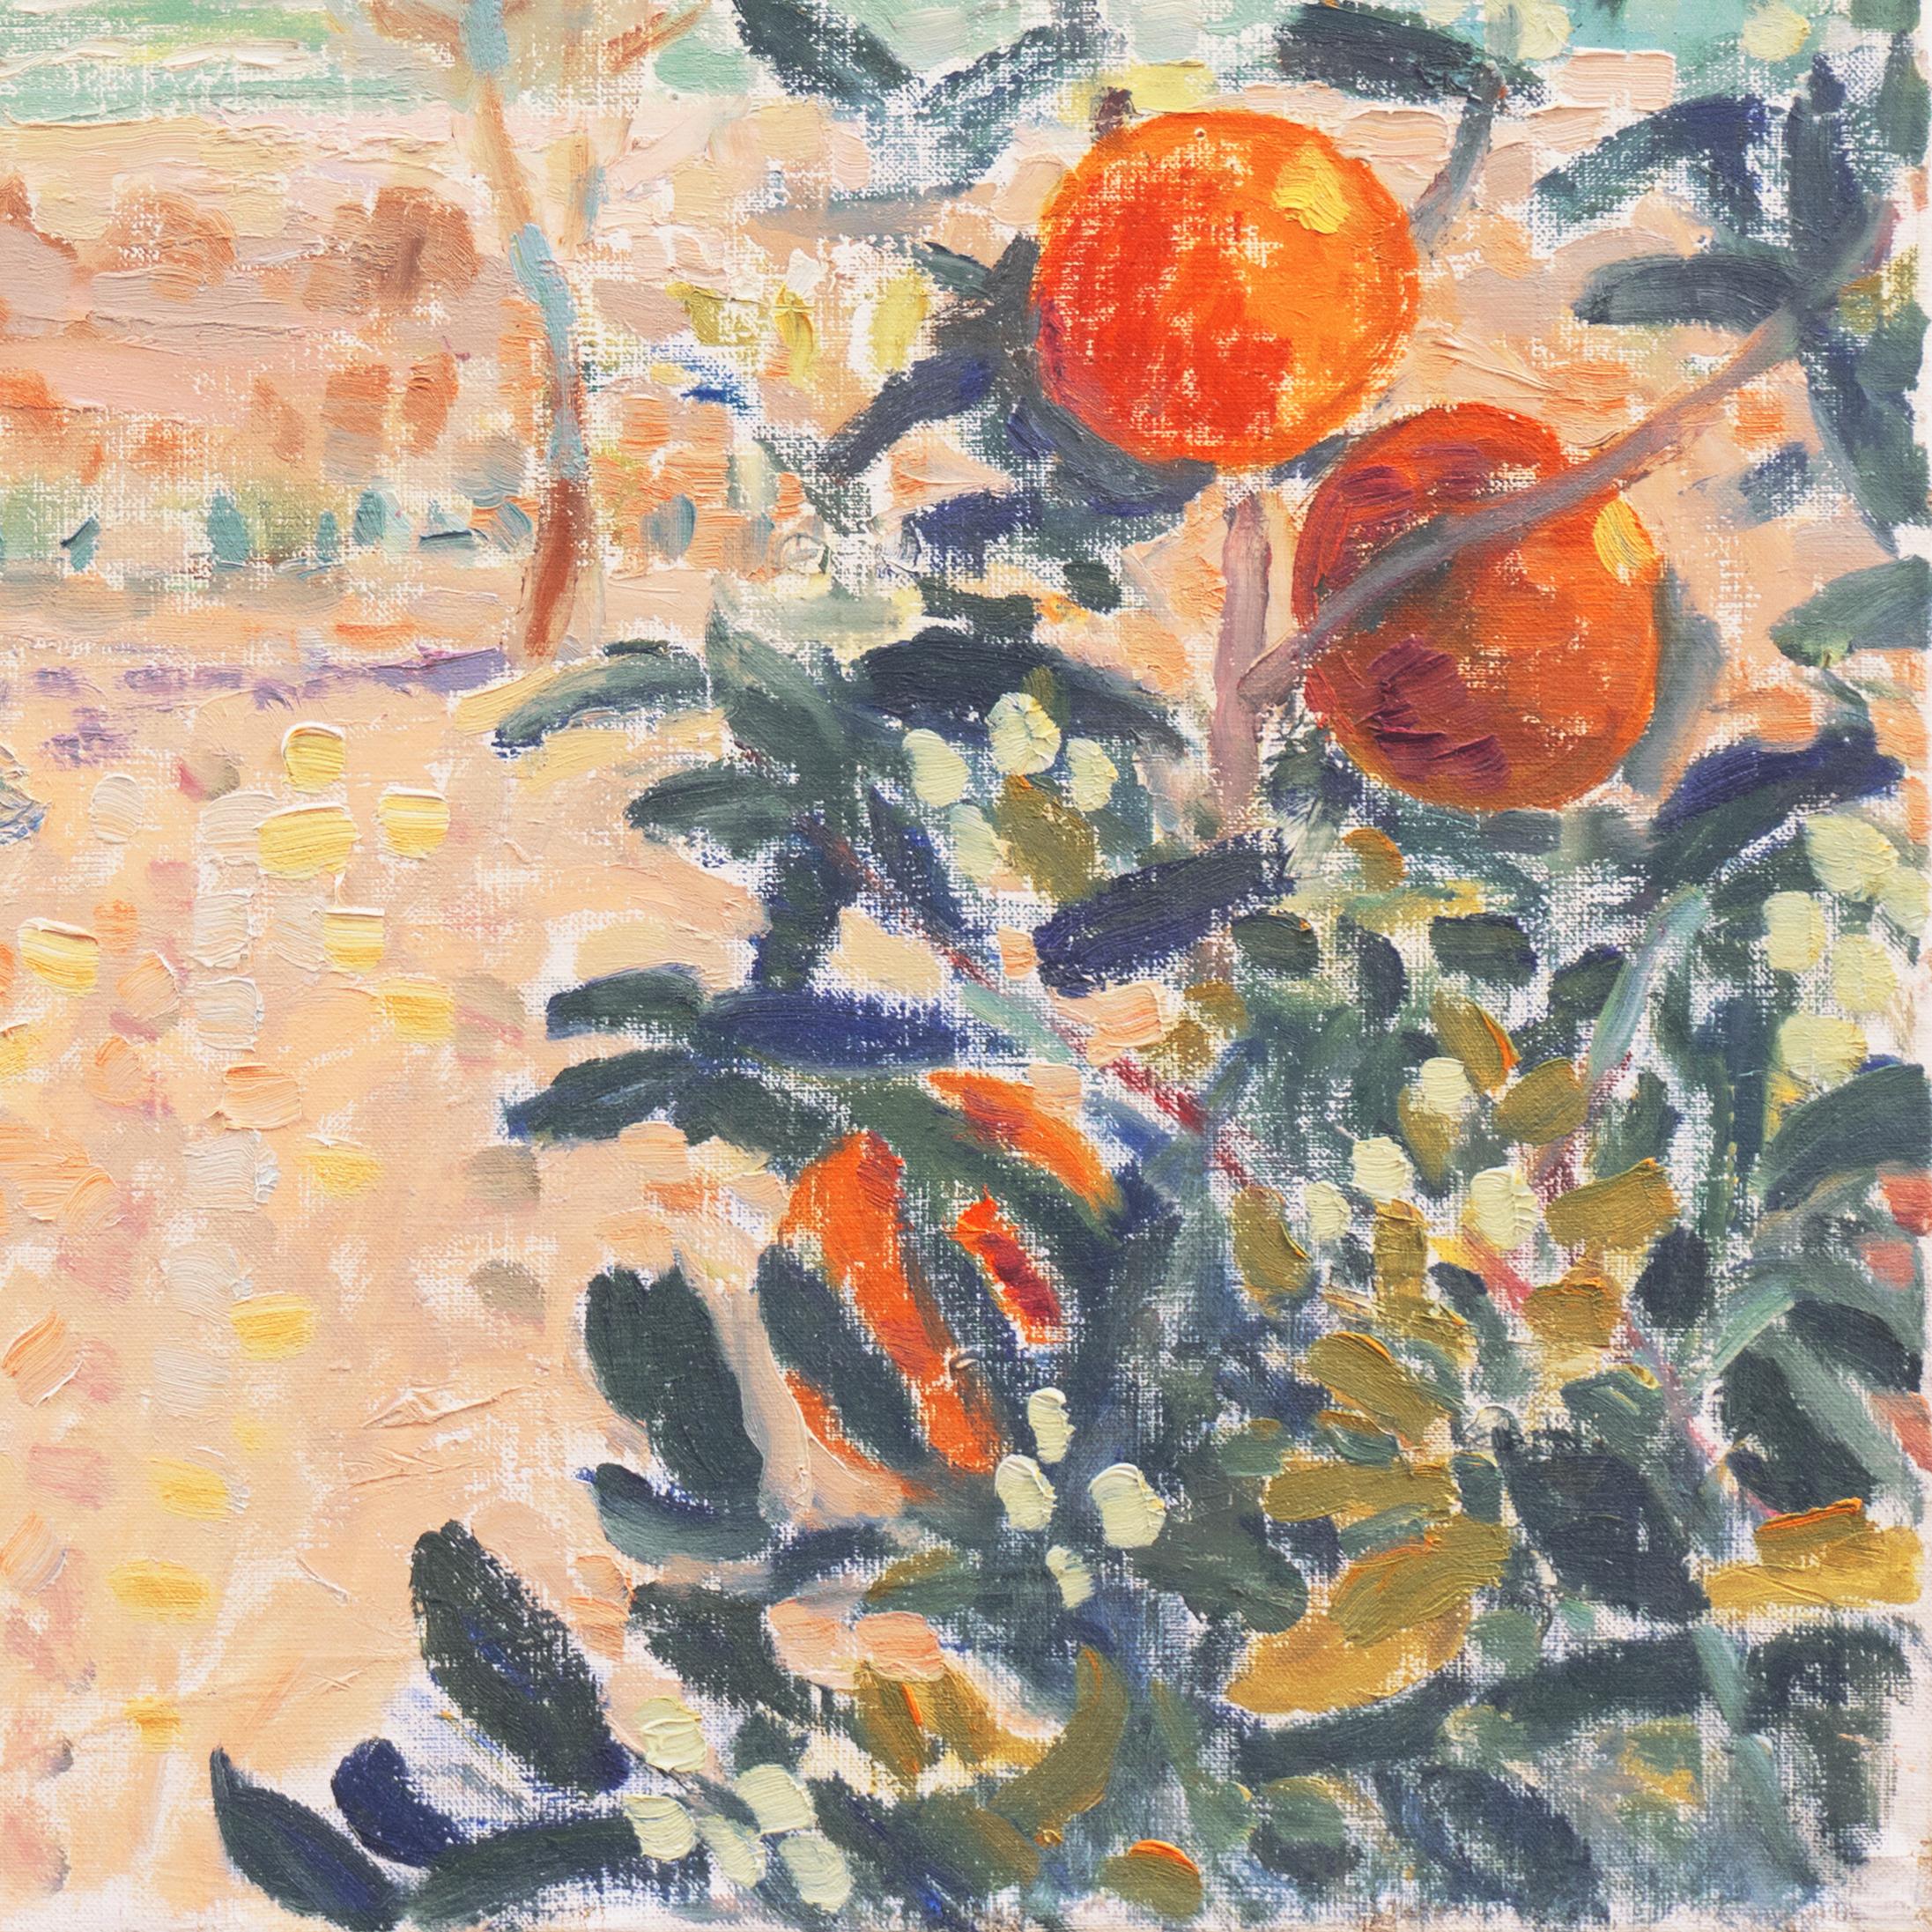 Signed lower left, 'V. Rorup' for Viggo Julius Rorup (Danish, 1903-1971) and dated 1967.

A substantial, Post-Impressionist oil landscape showing a view of the Mediterranean with an orange tree and blossoming apple trees in the foreground, framing a